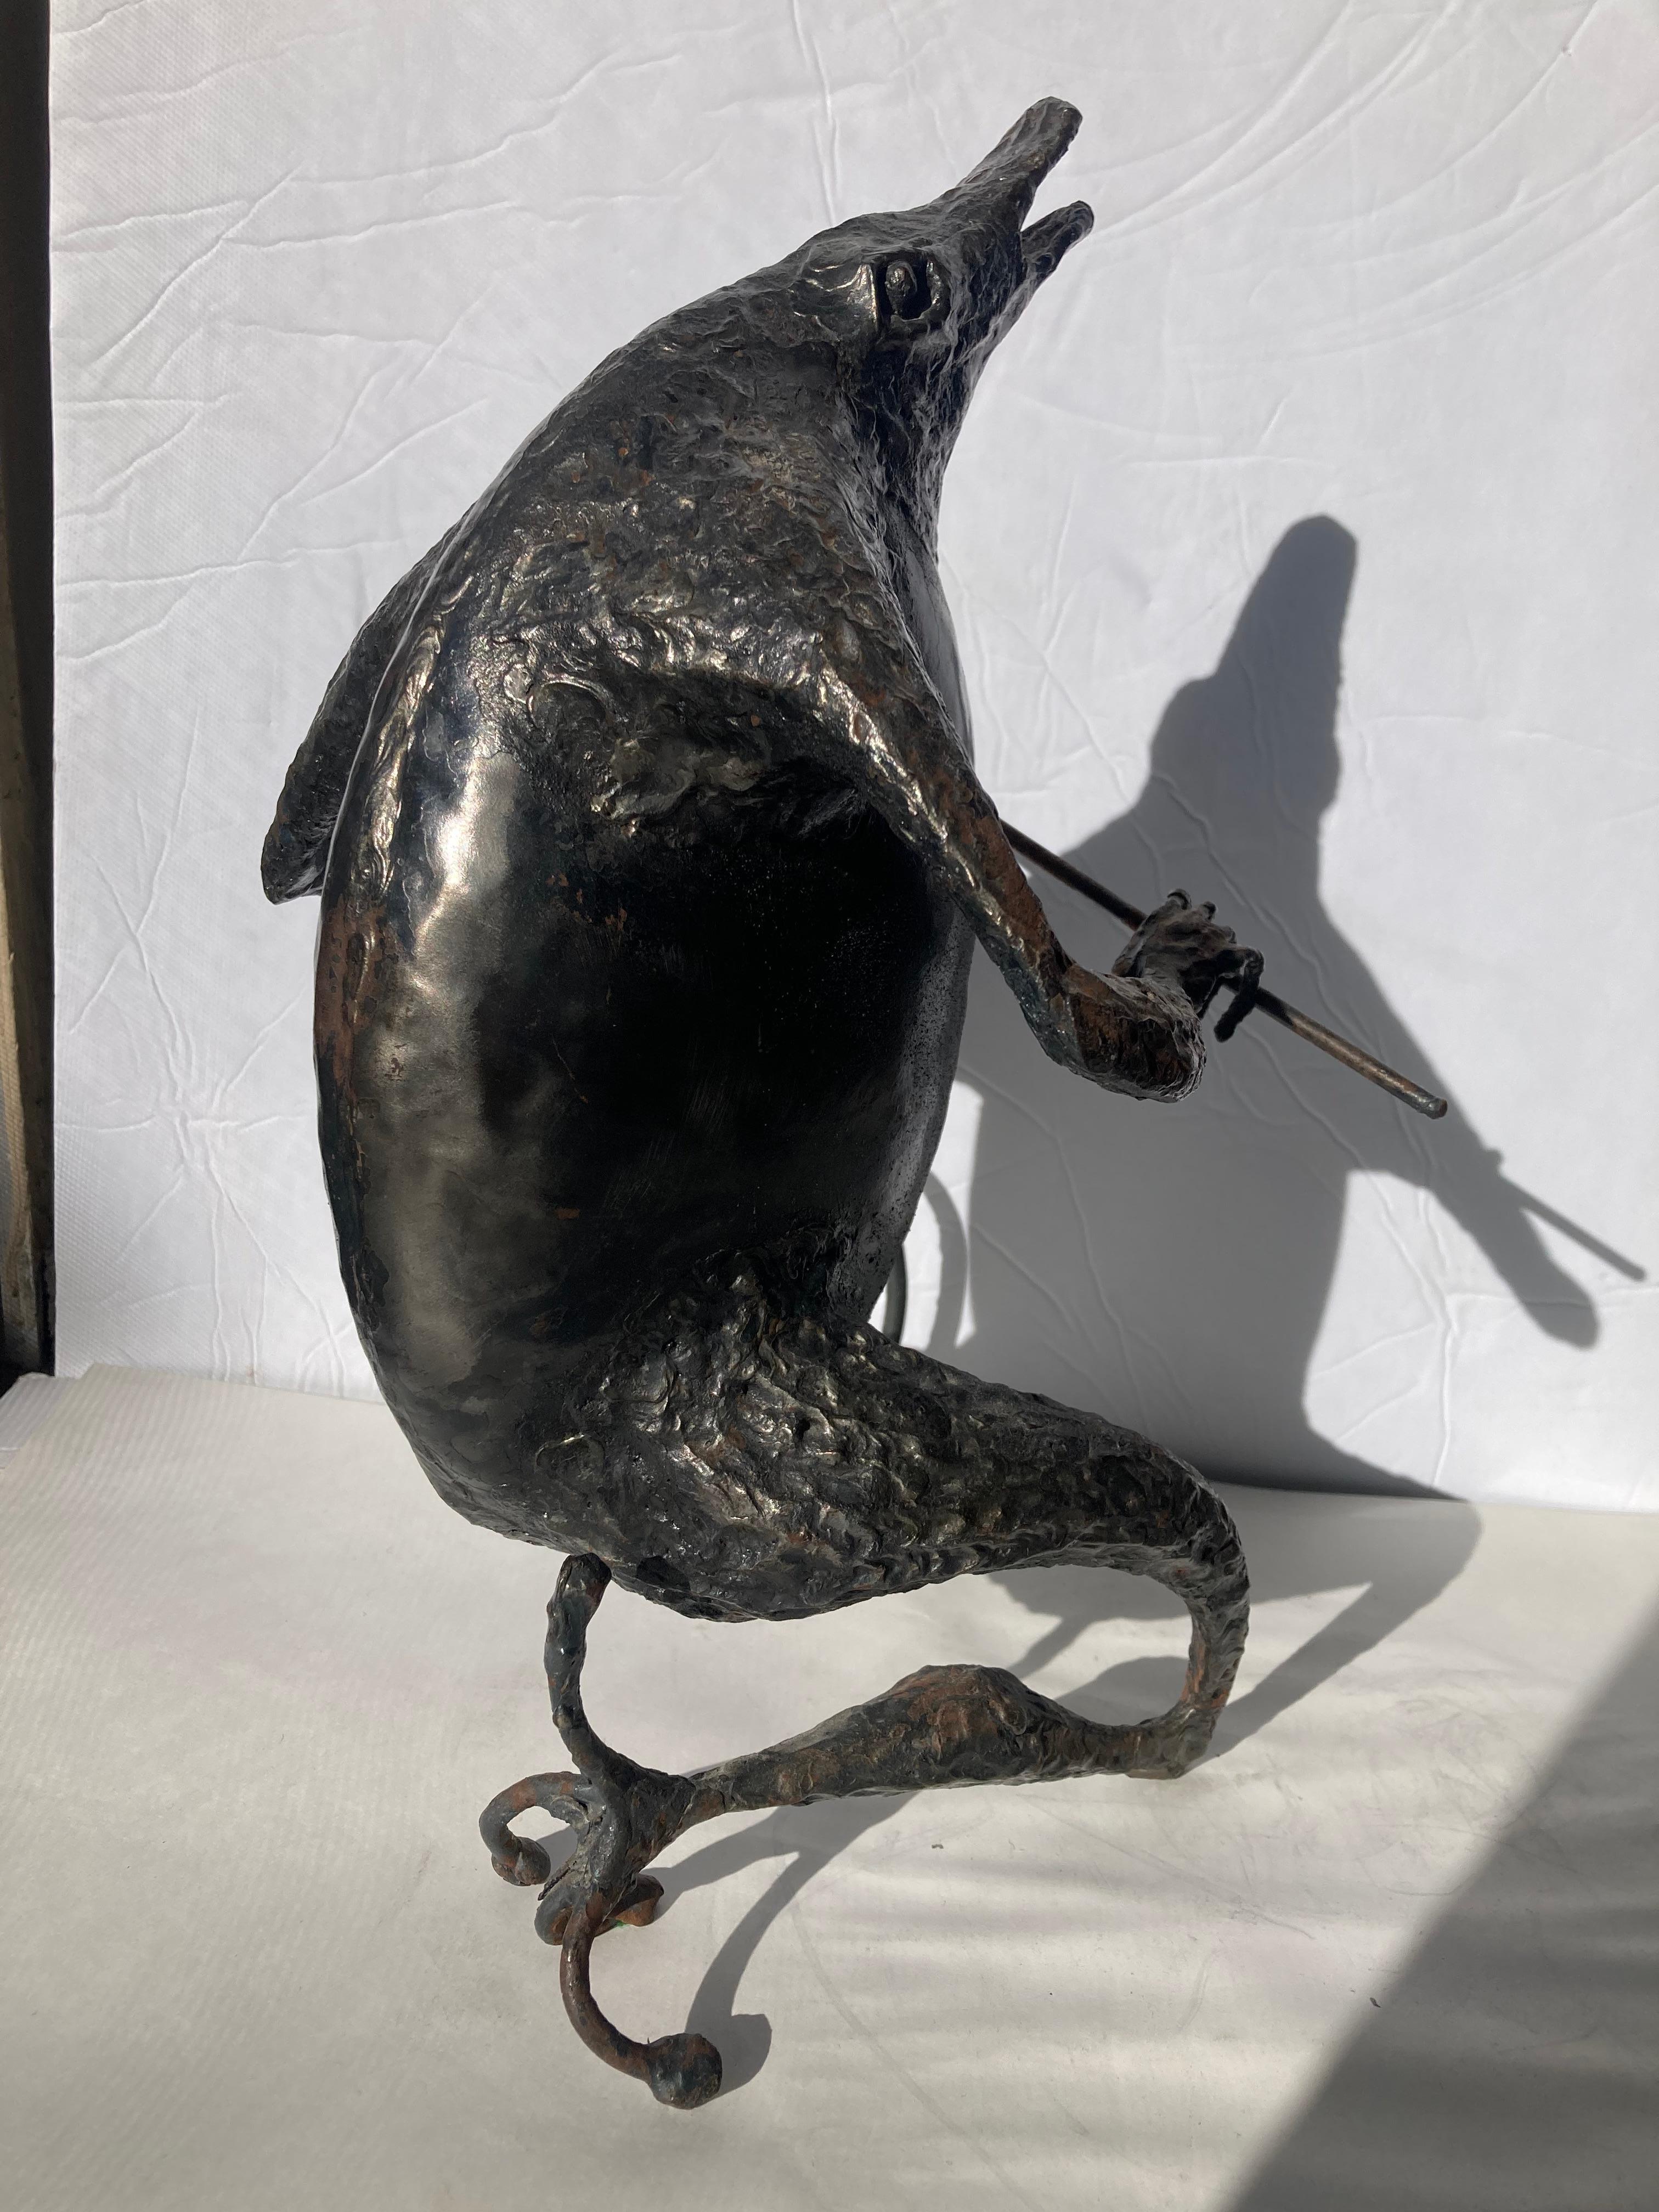 Great sample of the French artist Michel Anasse in this metal welded surrealist sculpture of the series 